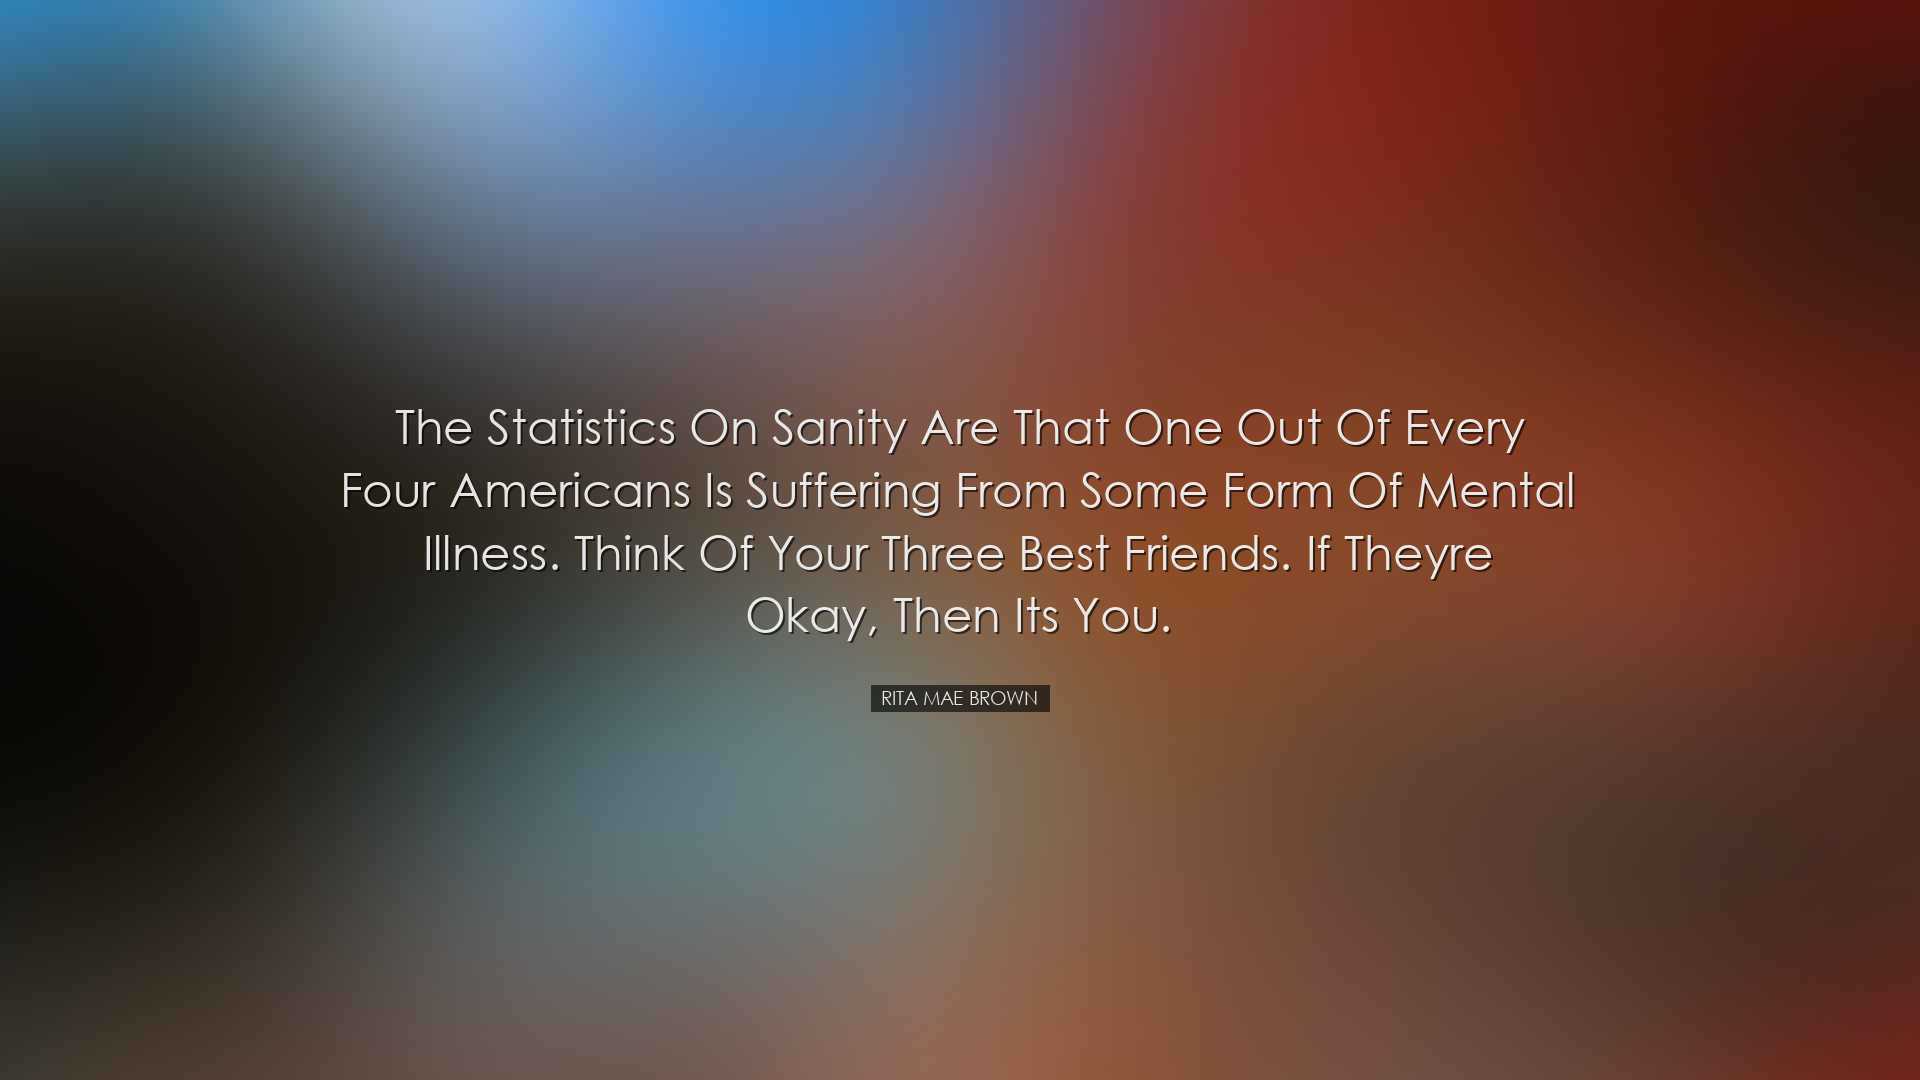 The statistics on sanity are that one out of every four Americans